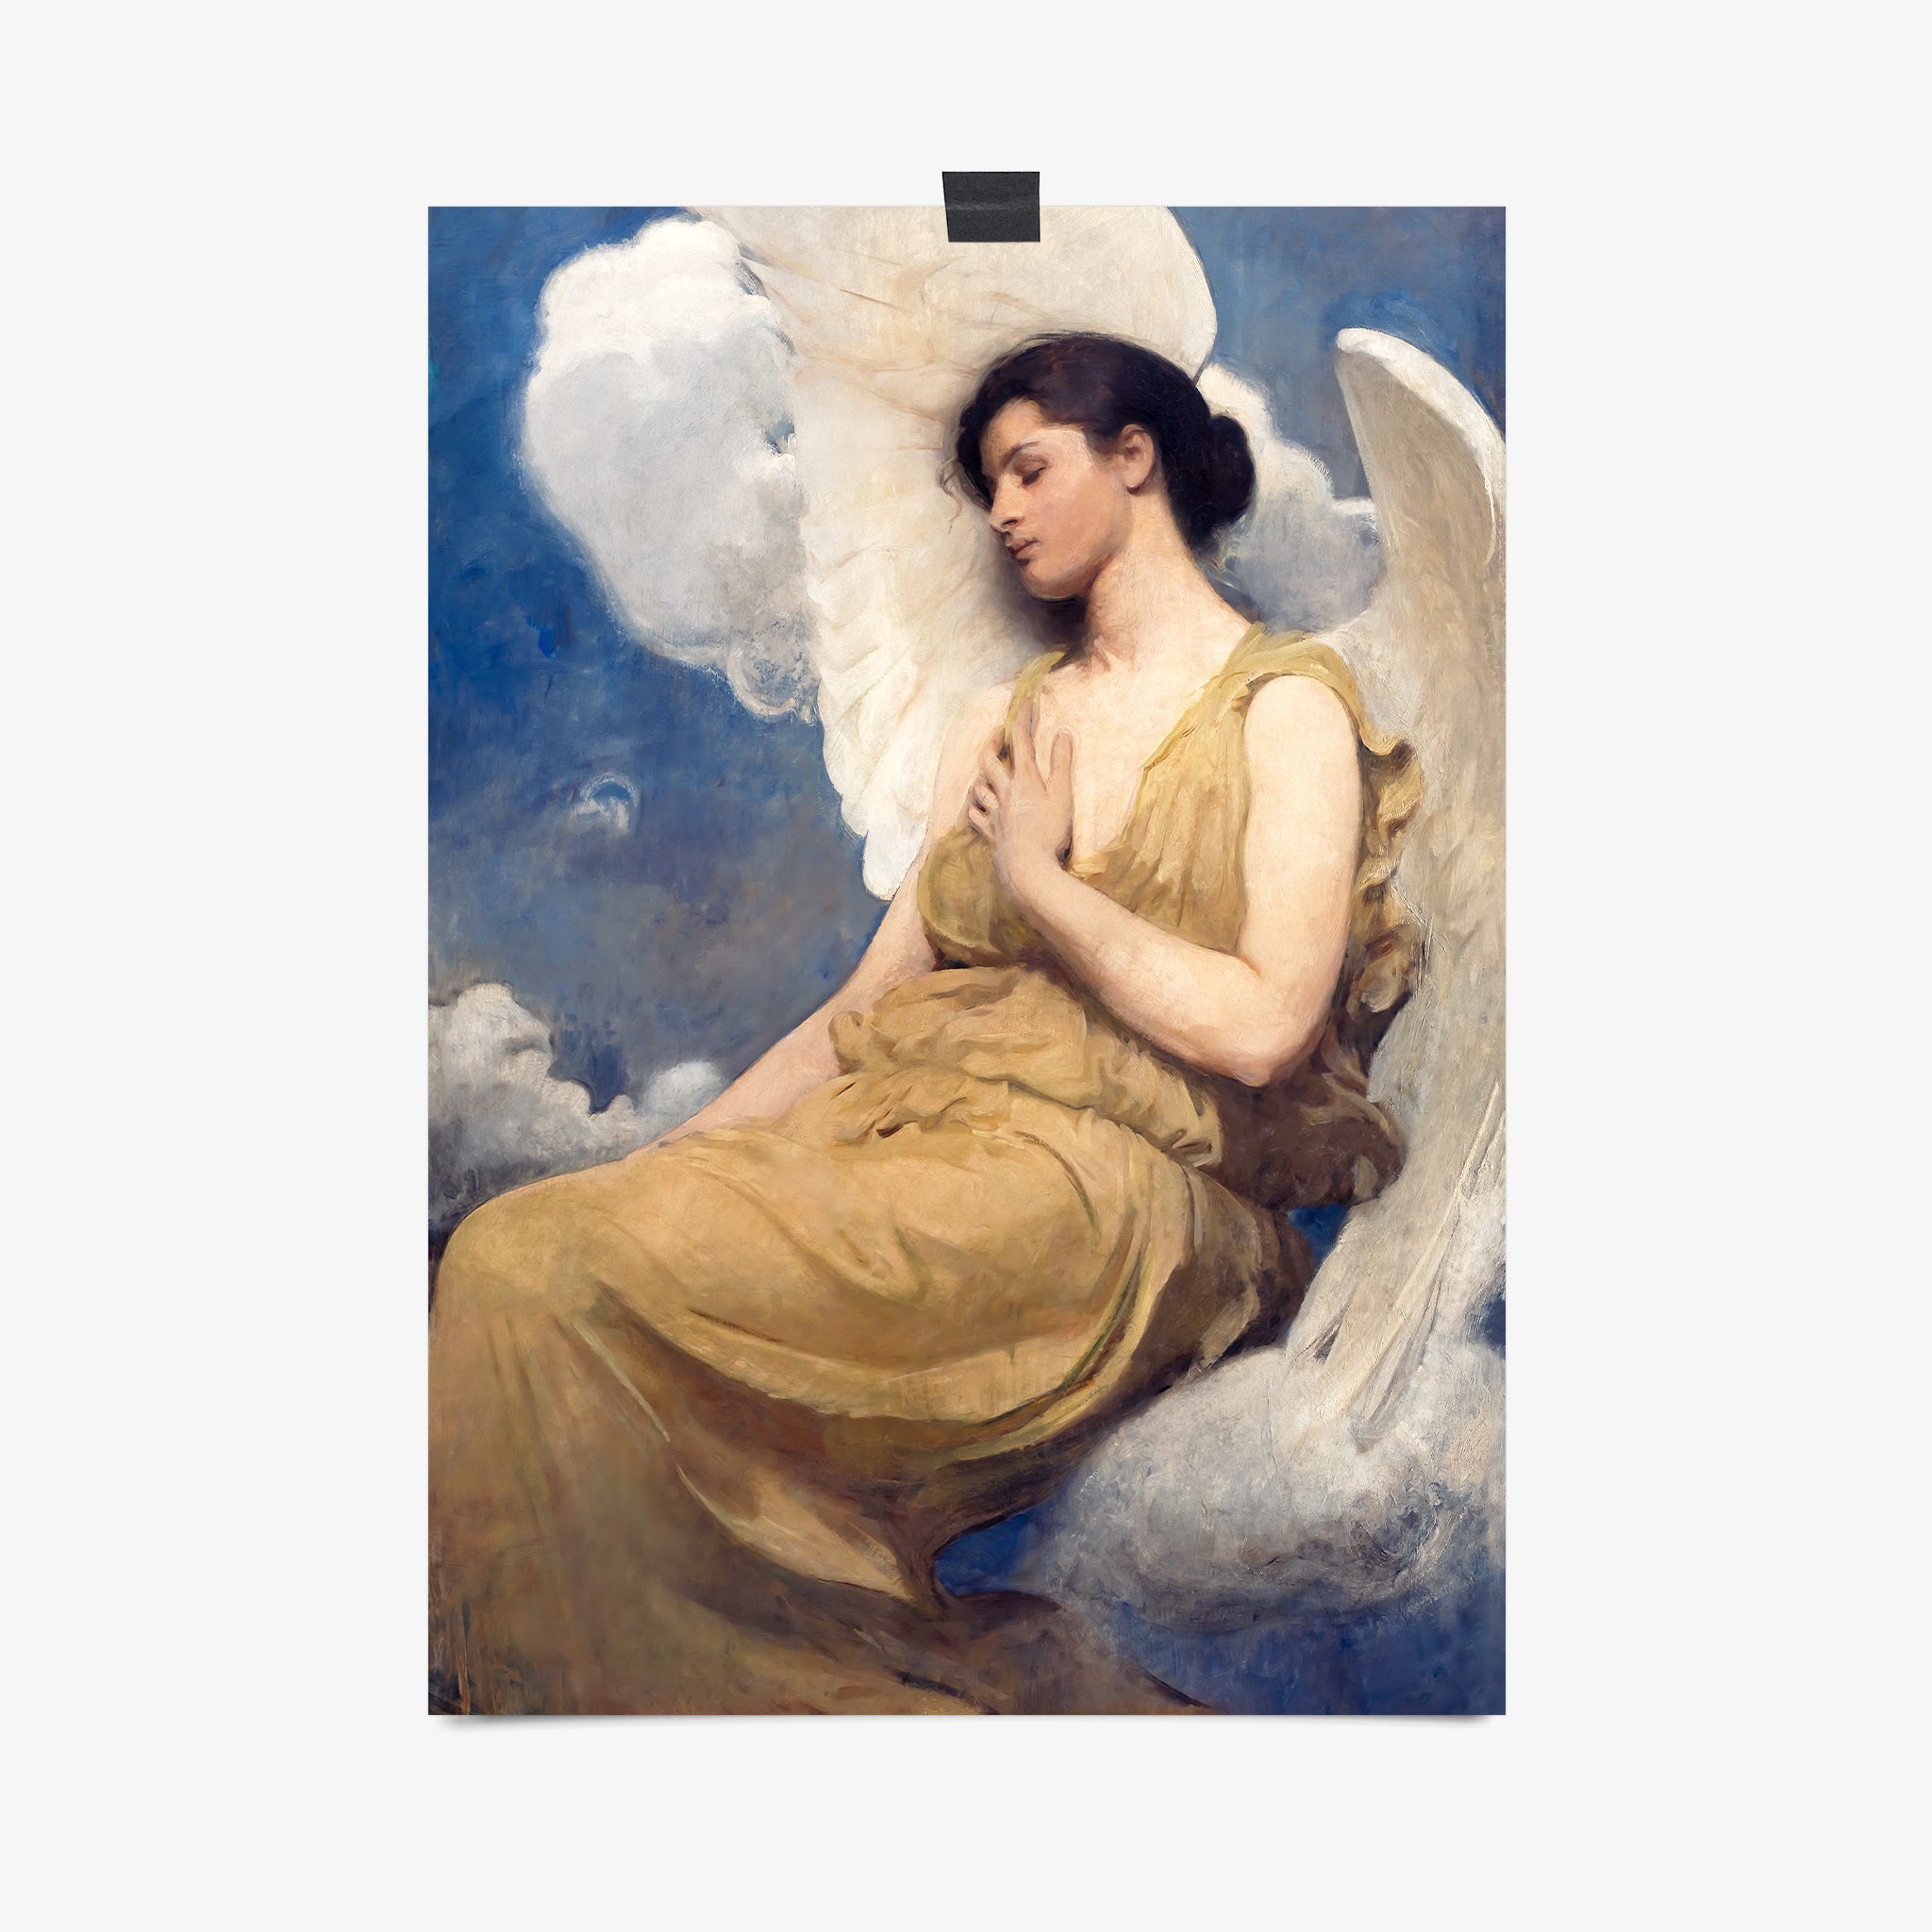 Be inspired by our classic art print Winged Figure by Abbott Handerson Thayer. This artwork was printed using the giclée process on archival acid-free paper that captures its timeless beauty in every detail.